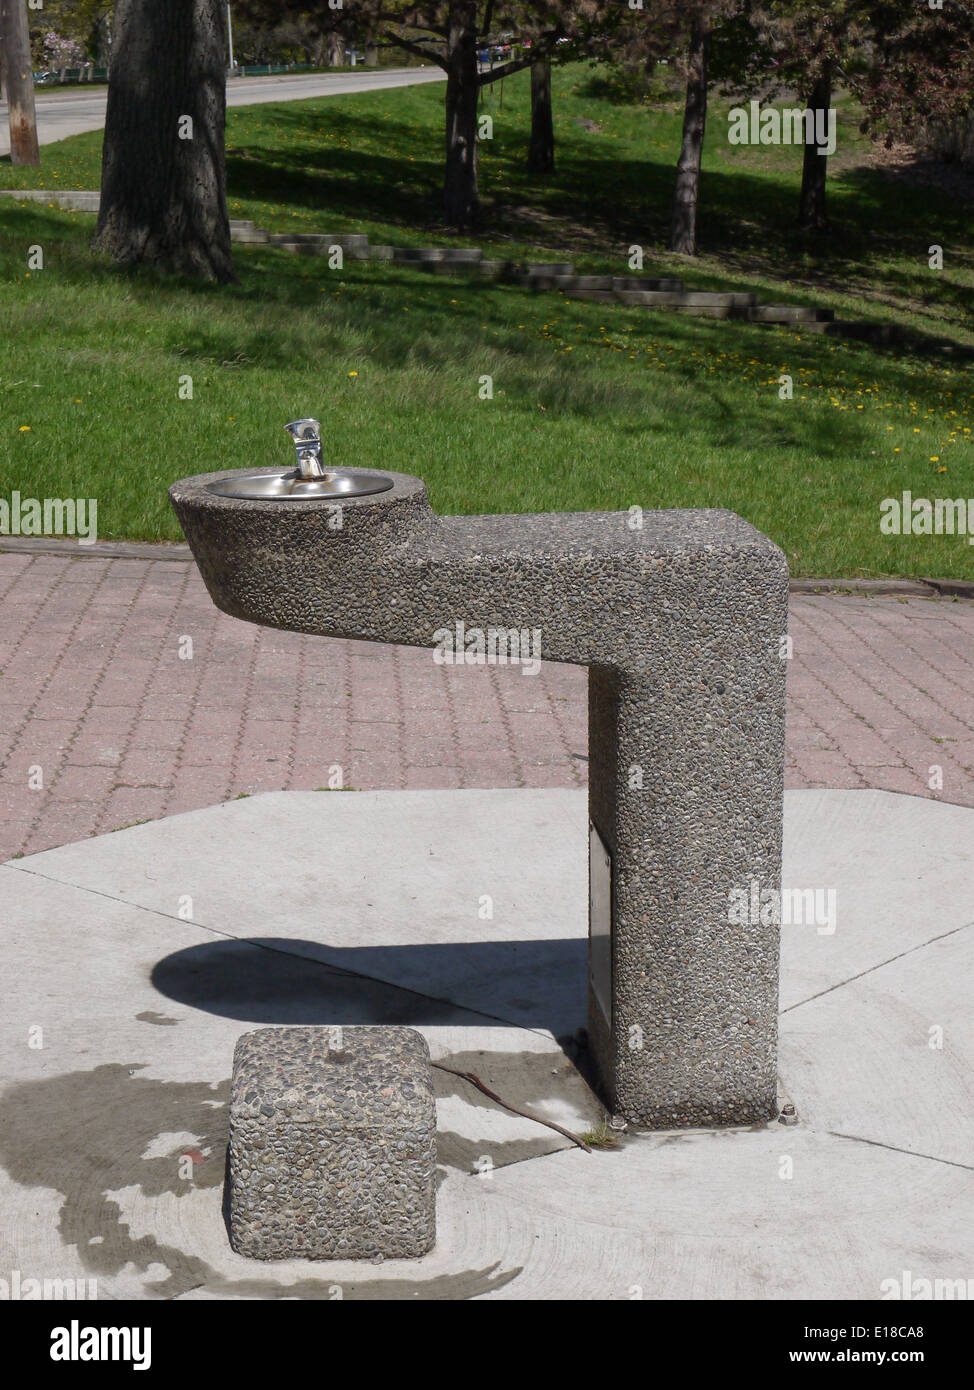 drink water fountain outdoor faucet summer Stock Photo